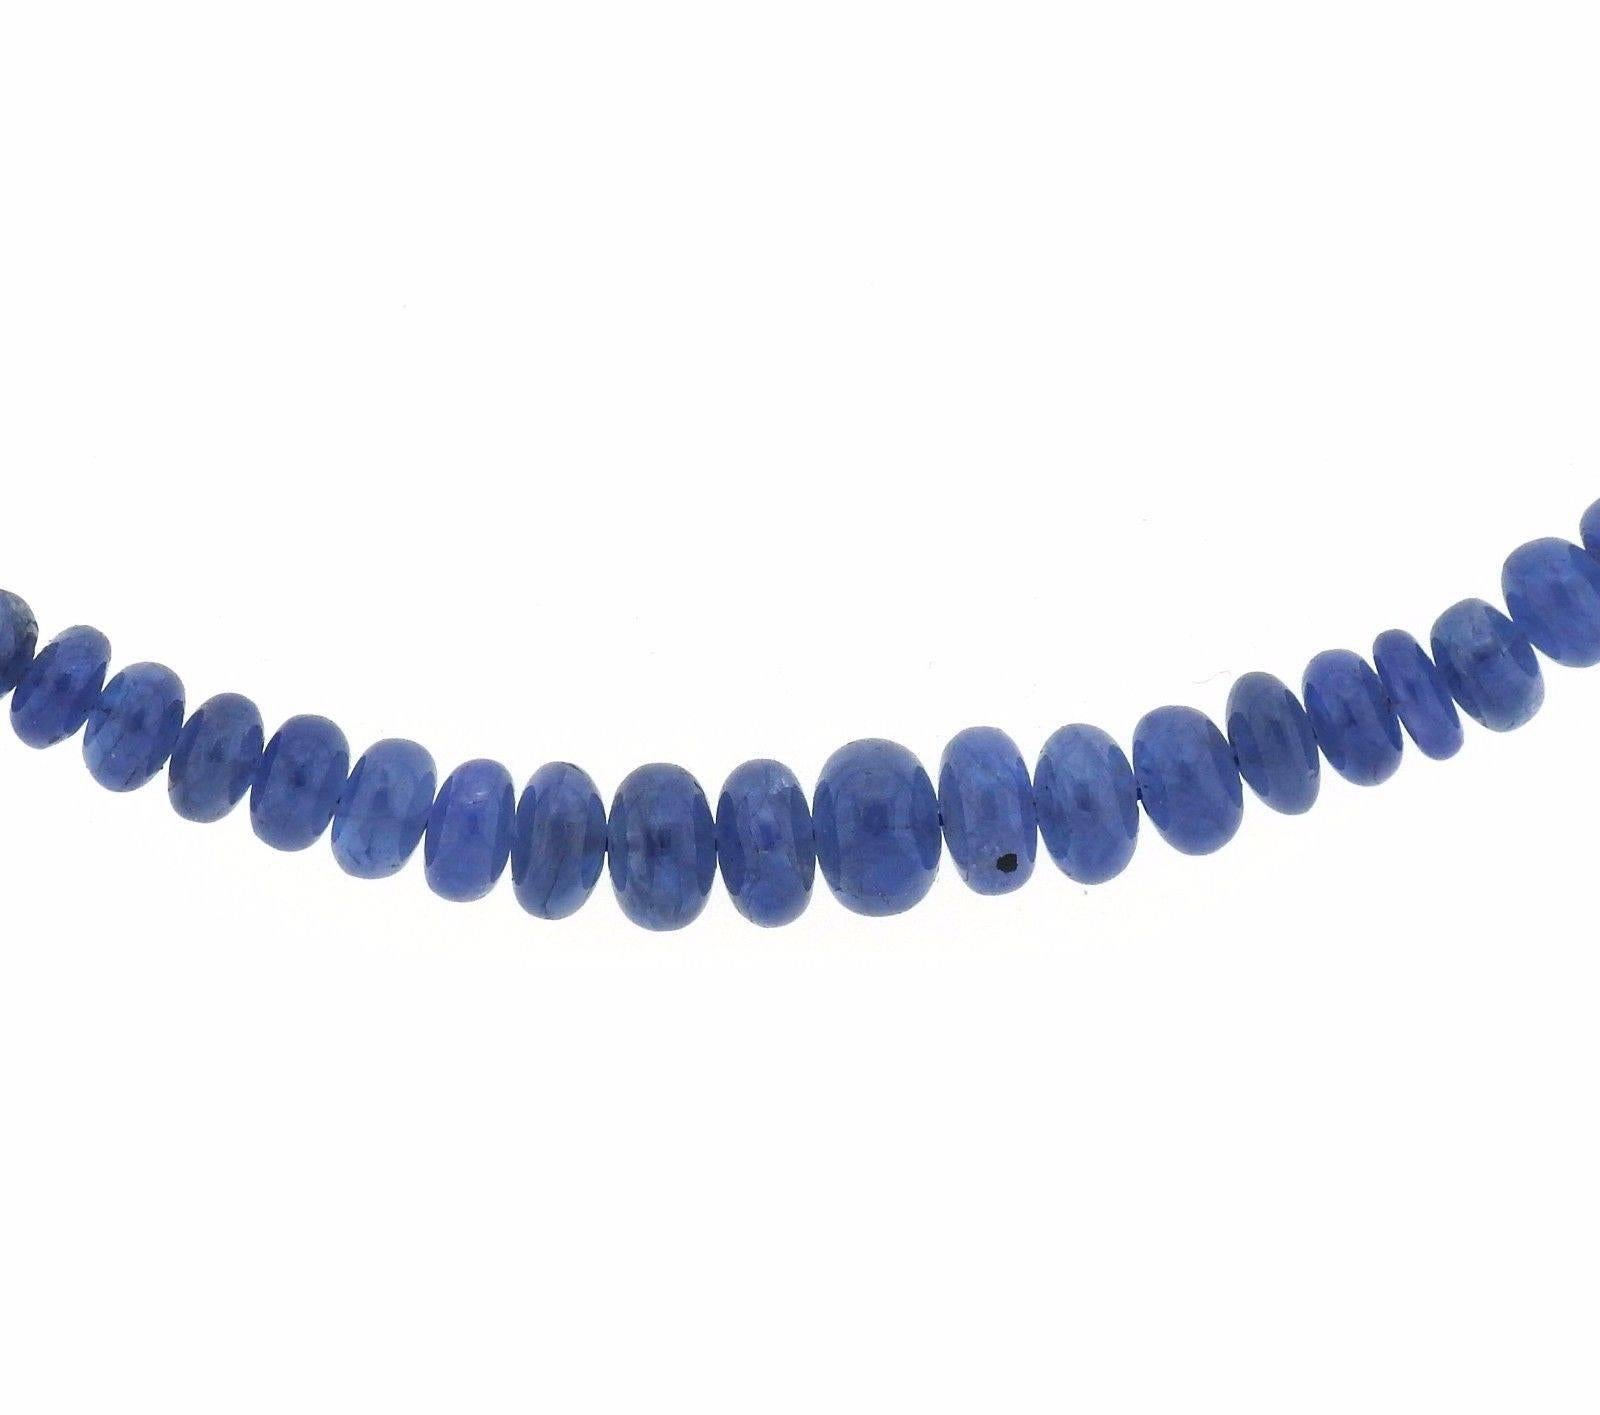 An 18k yellow and white gold necklace featuring sapphire beads (2.8mm - 7.5mm in diameter).  The necklace is 16 1/2